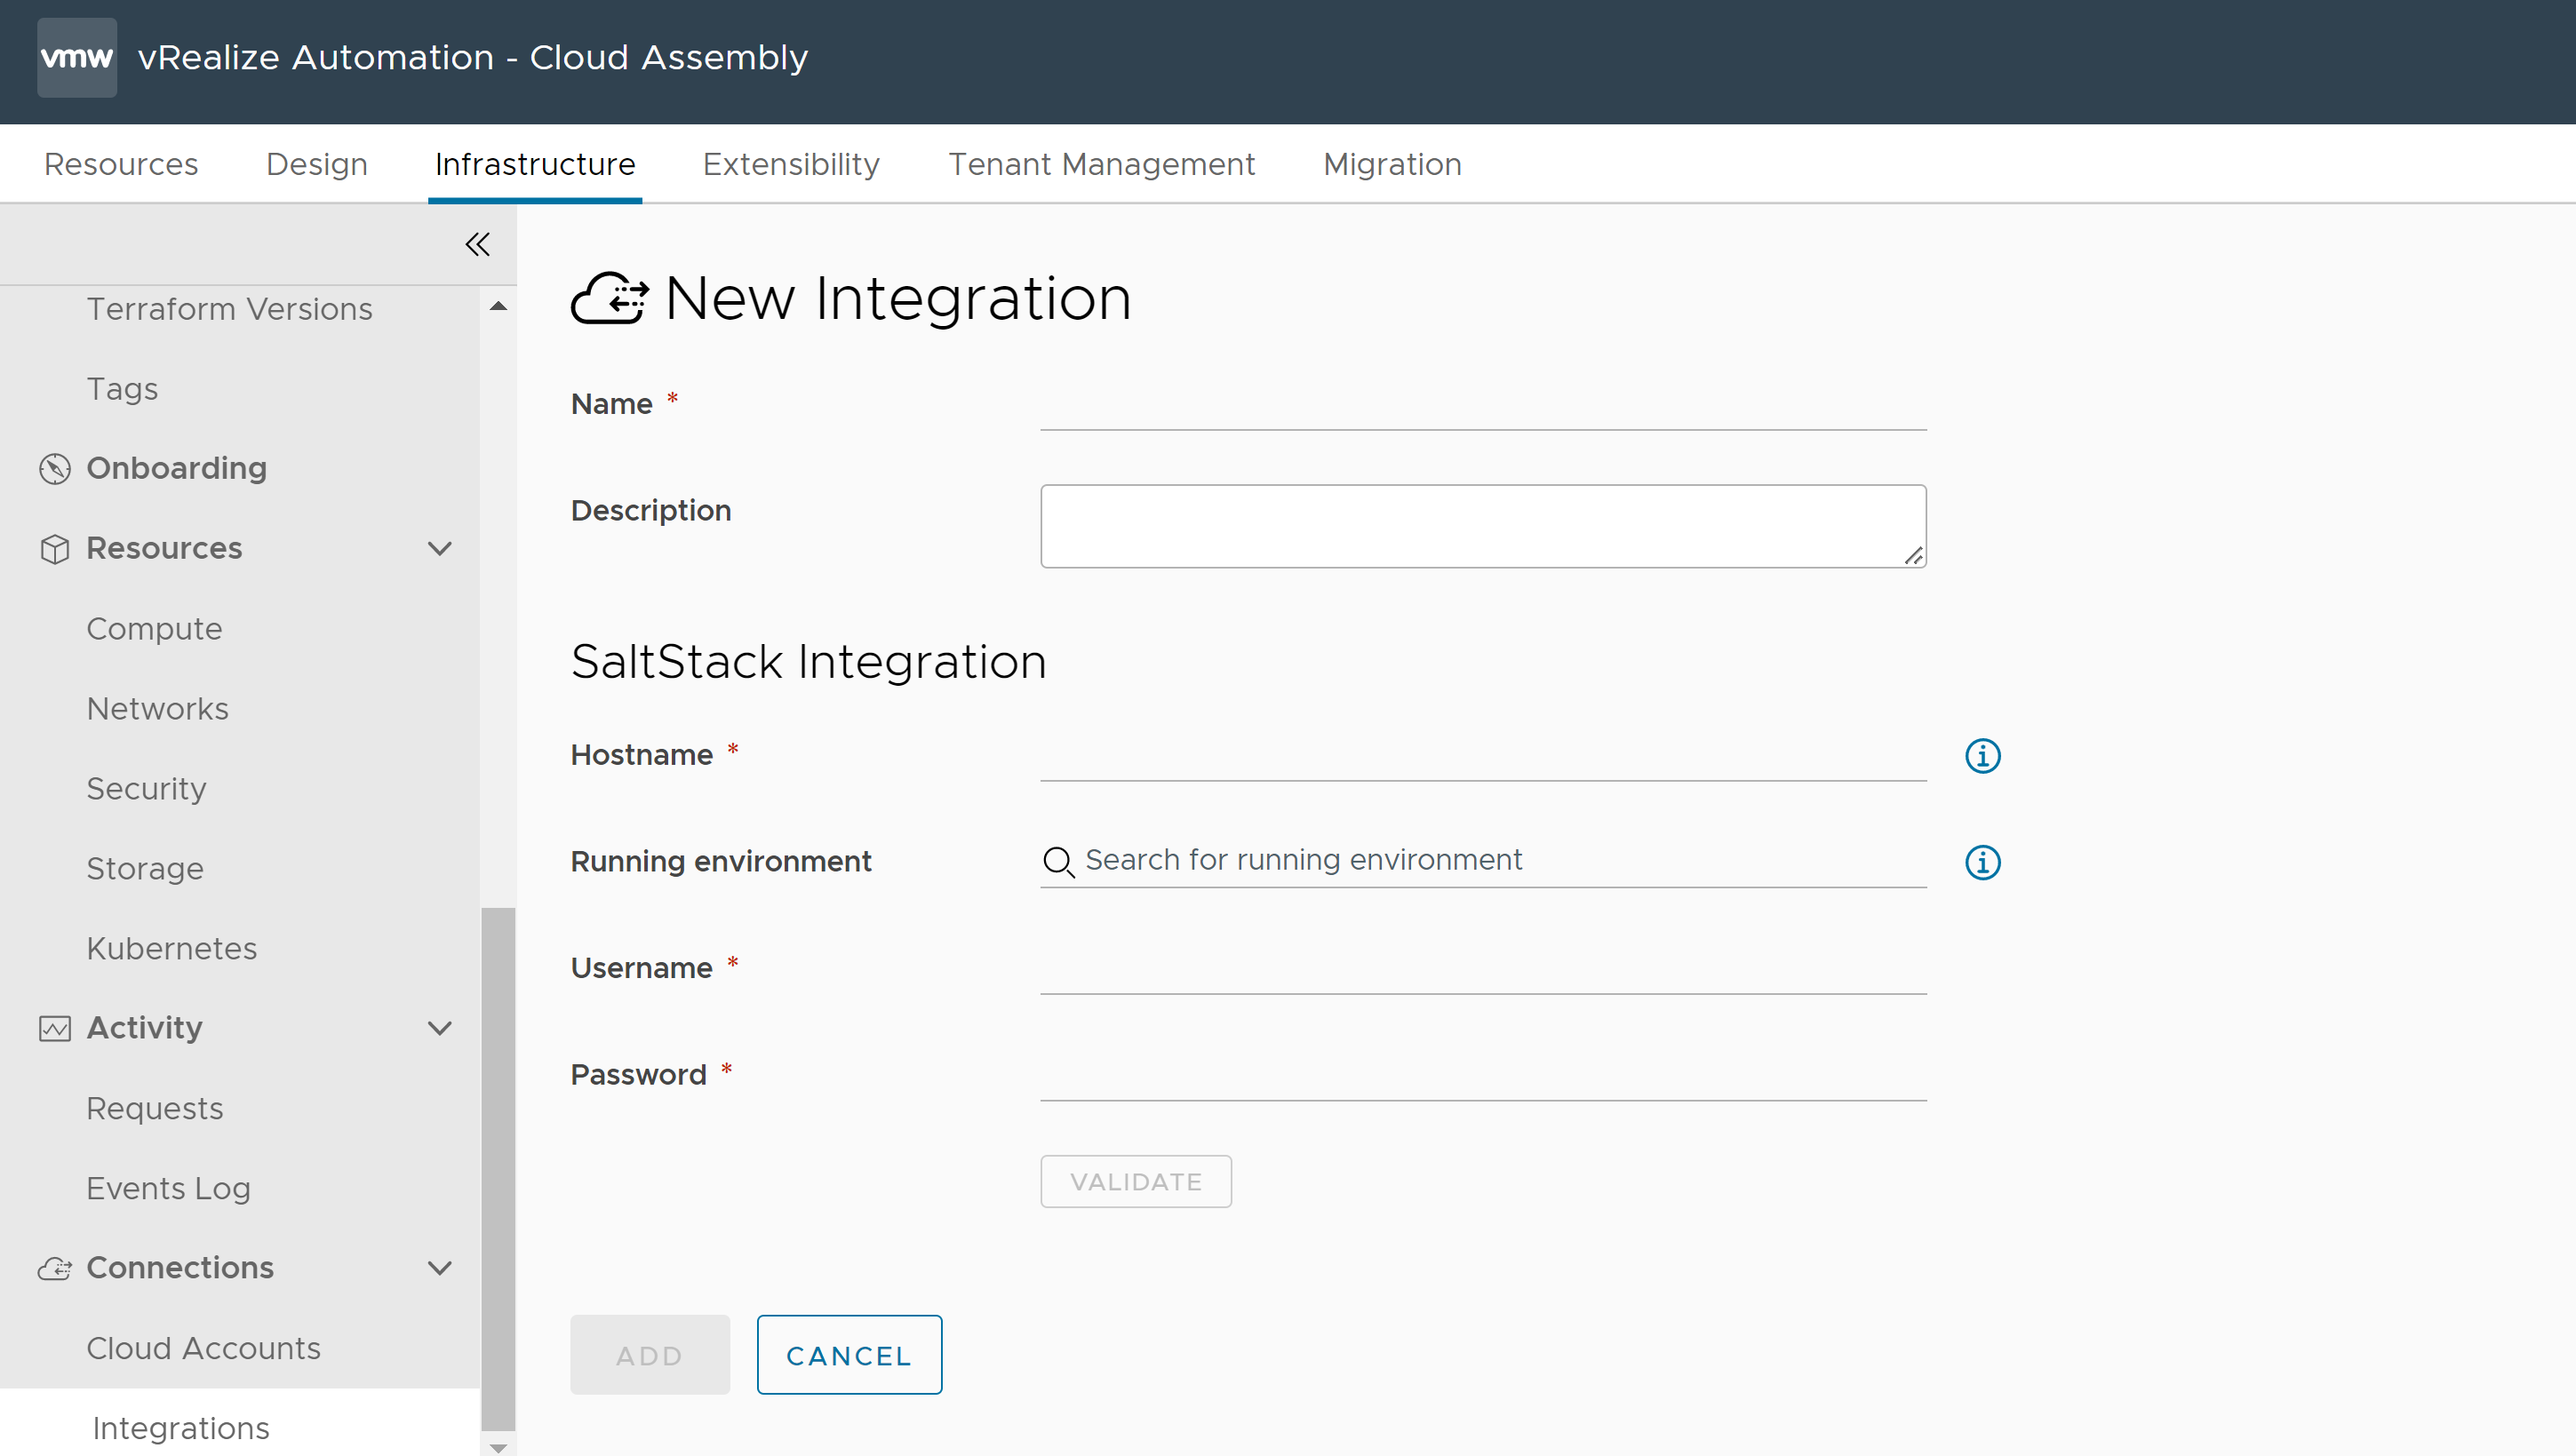 Form to create a new integration in Cloud Assembly